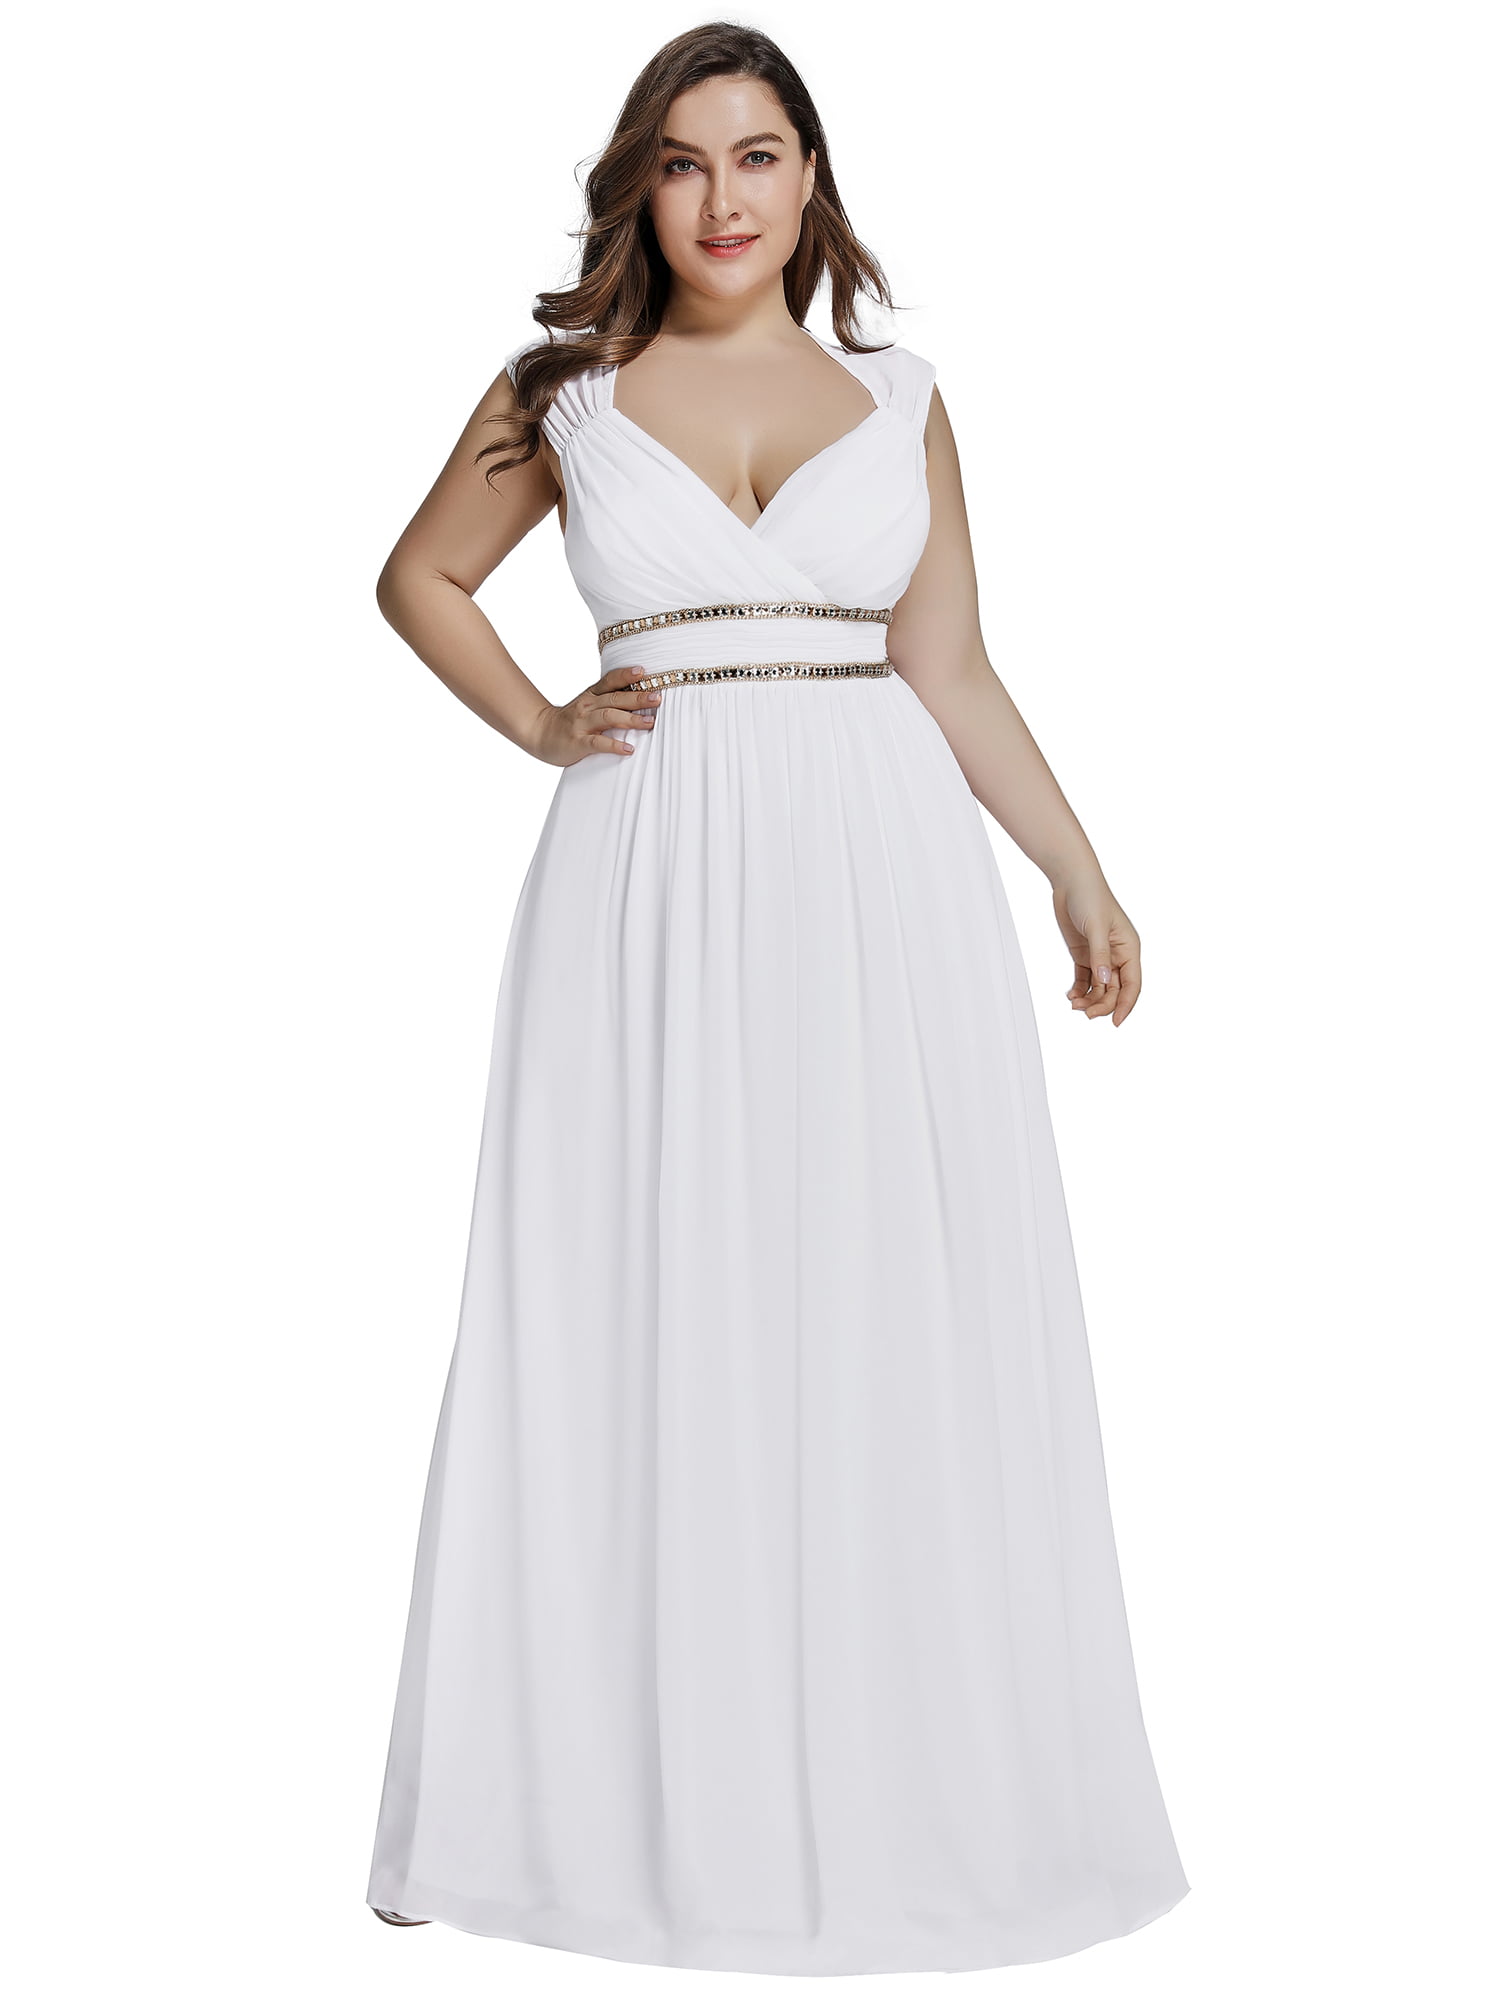 Ever-Pretty Plus Size White Wedding Prom Dresses Long Cap Sleeve Party Gown 